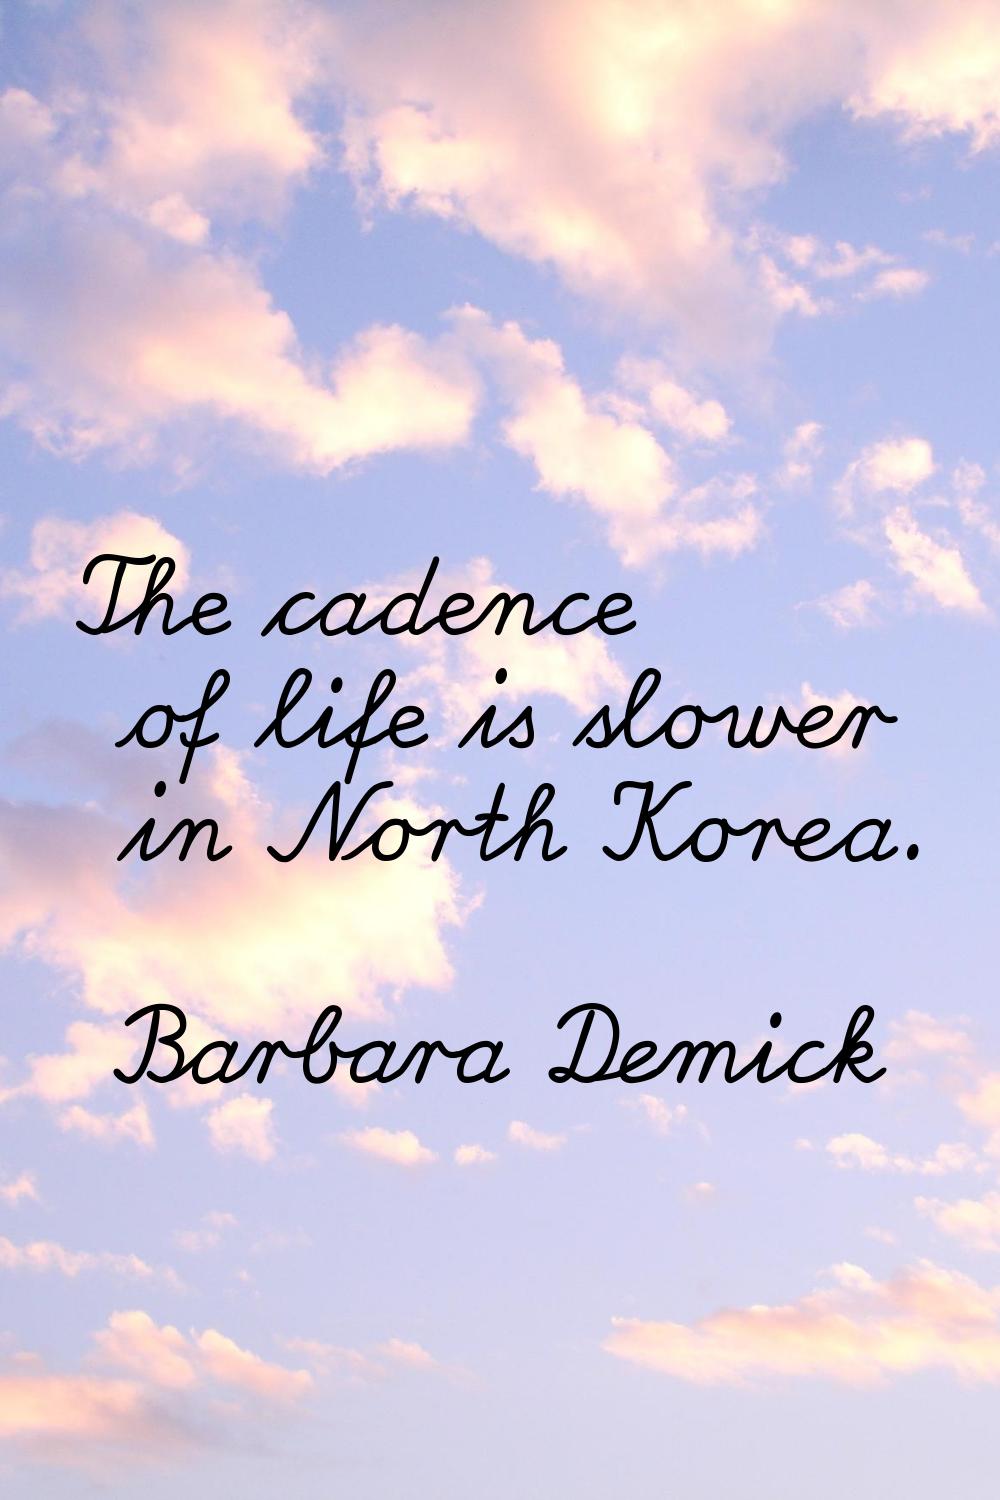 The cadence of life is slower in North Korea.